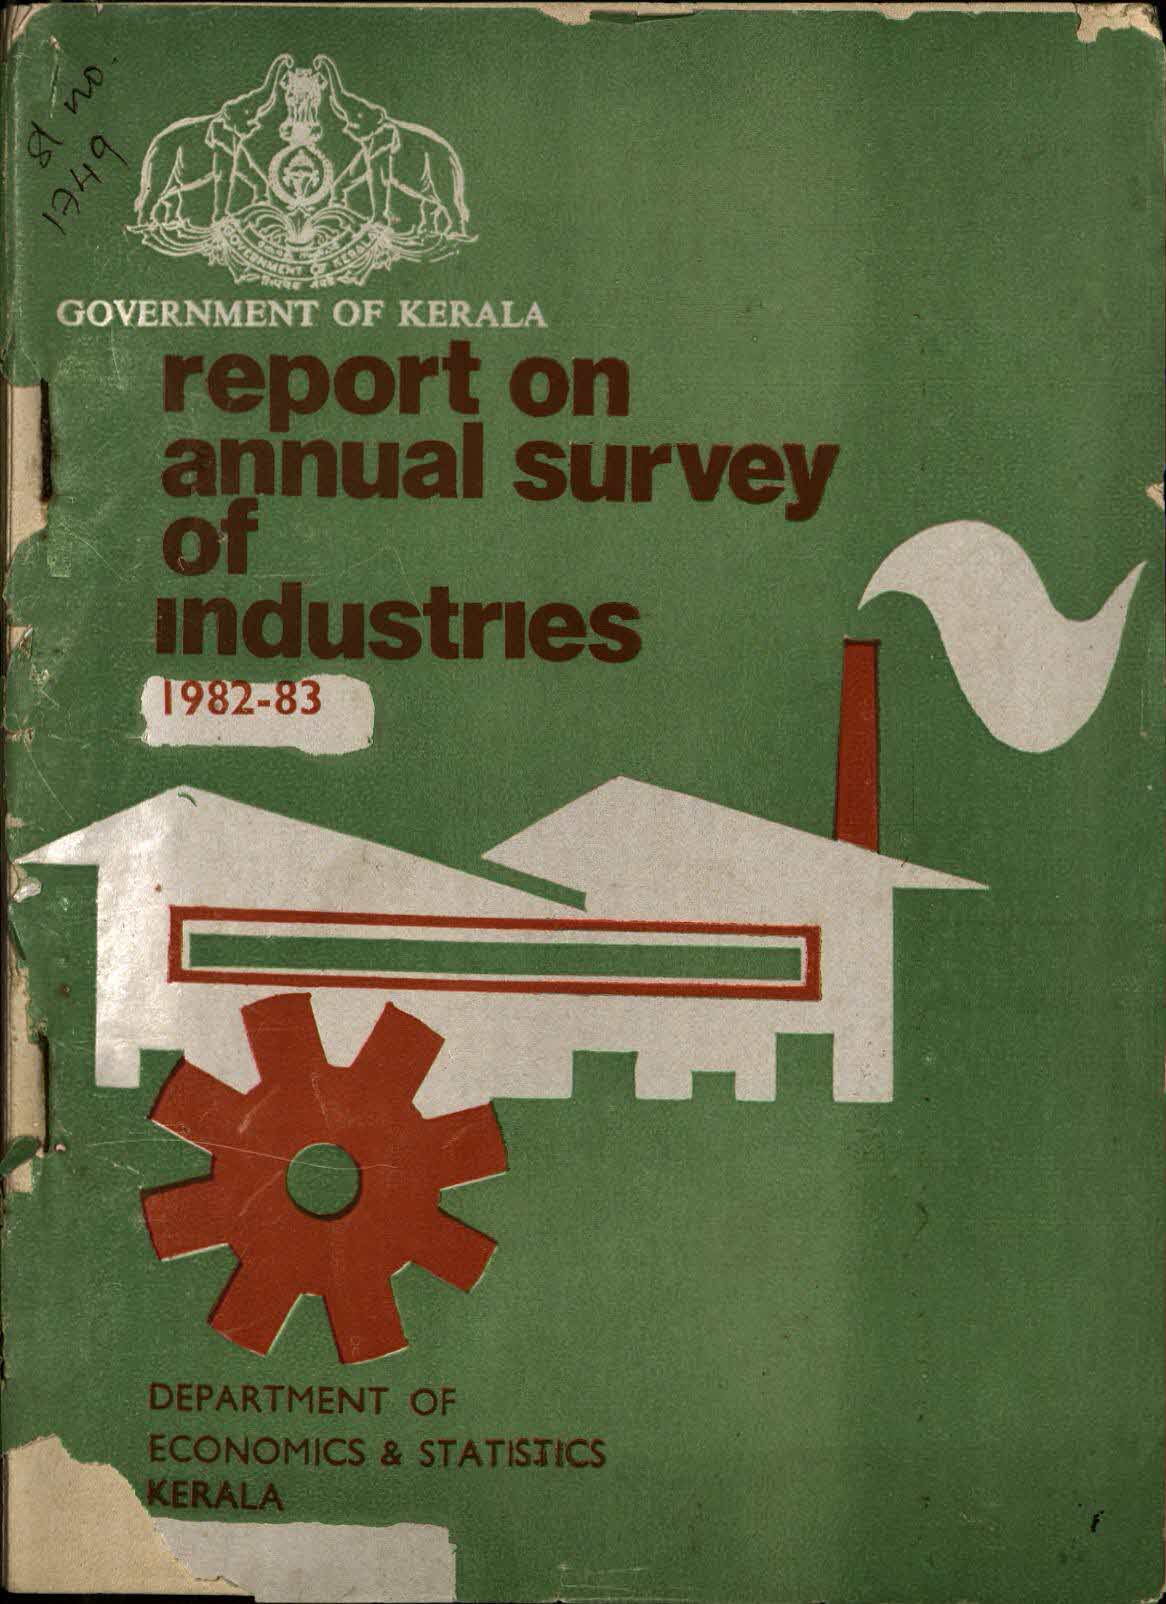 REPORT ON ANNUAL SURVEY OF INDUSTRIES 1982-83